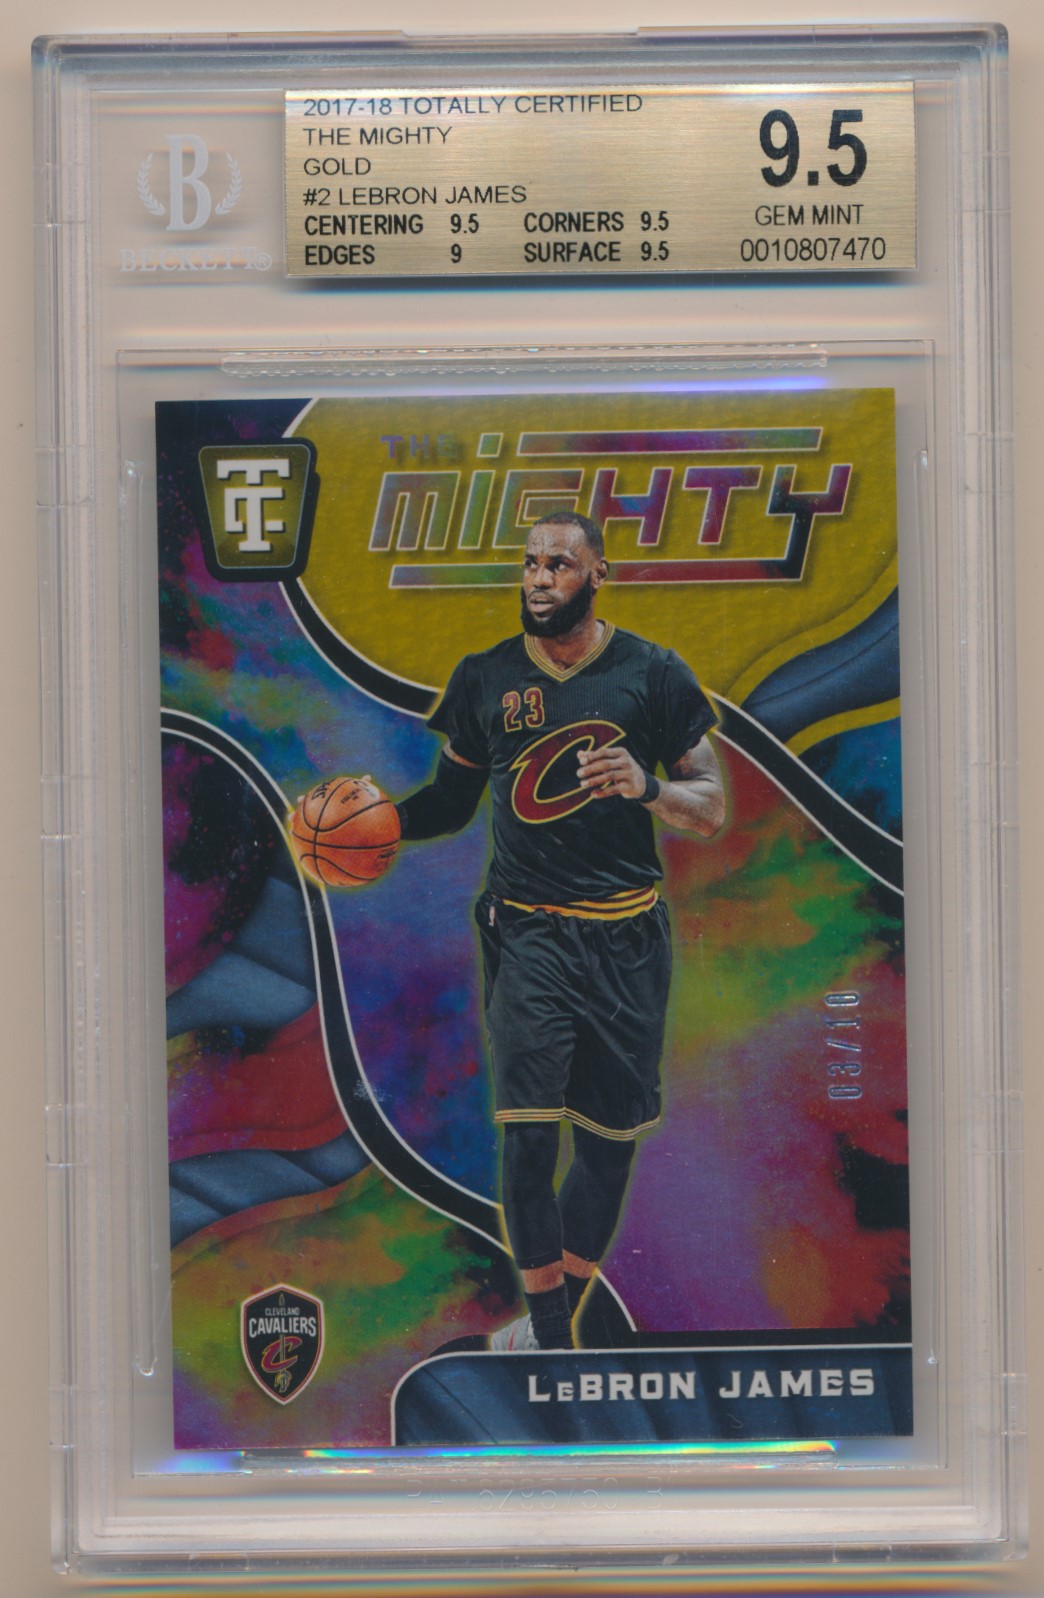 2017-18 Totally Certified The Mighty Gold #2 Lebron James /10 BGS 9.5 Gem Mint Z27342